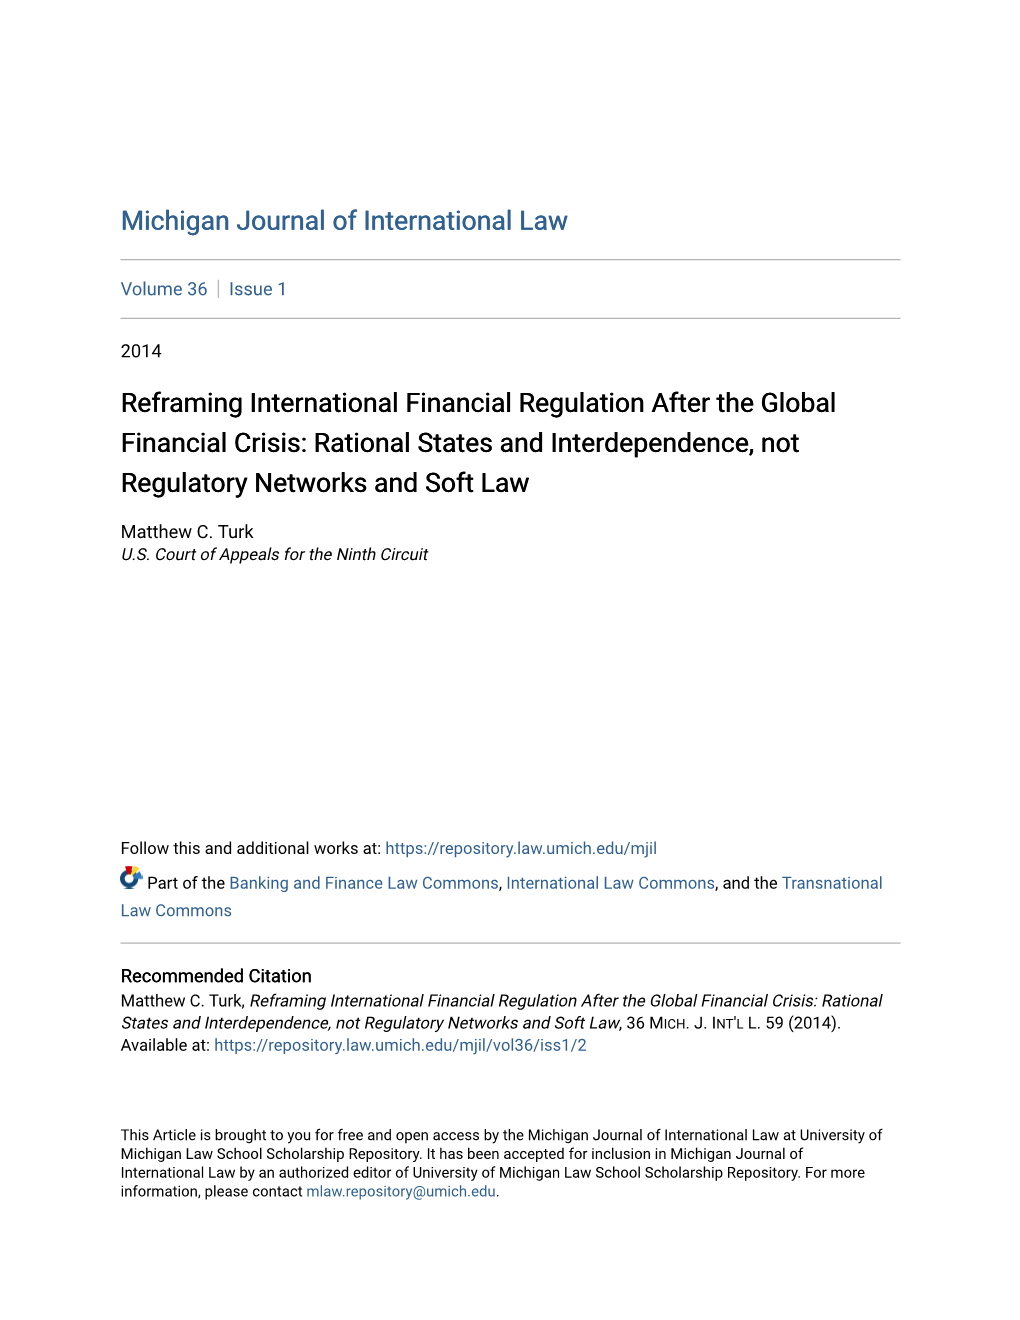 Reframing International Financial Regulation After the Global Financial Crisis: Rational States and Interdependence, Not Regulatory Networks and Soft Law